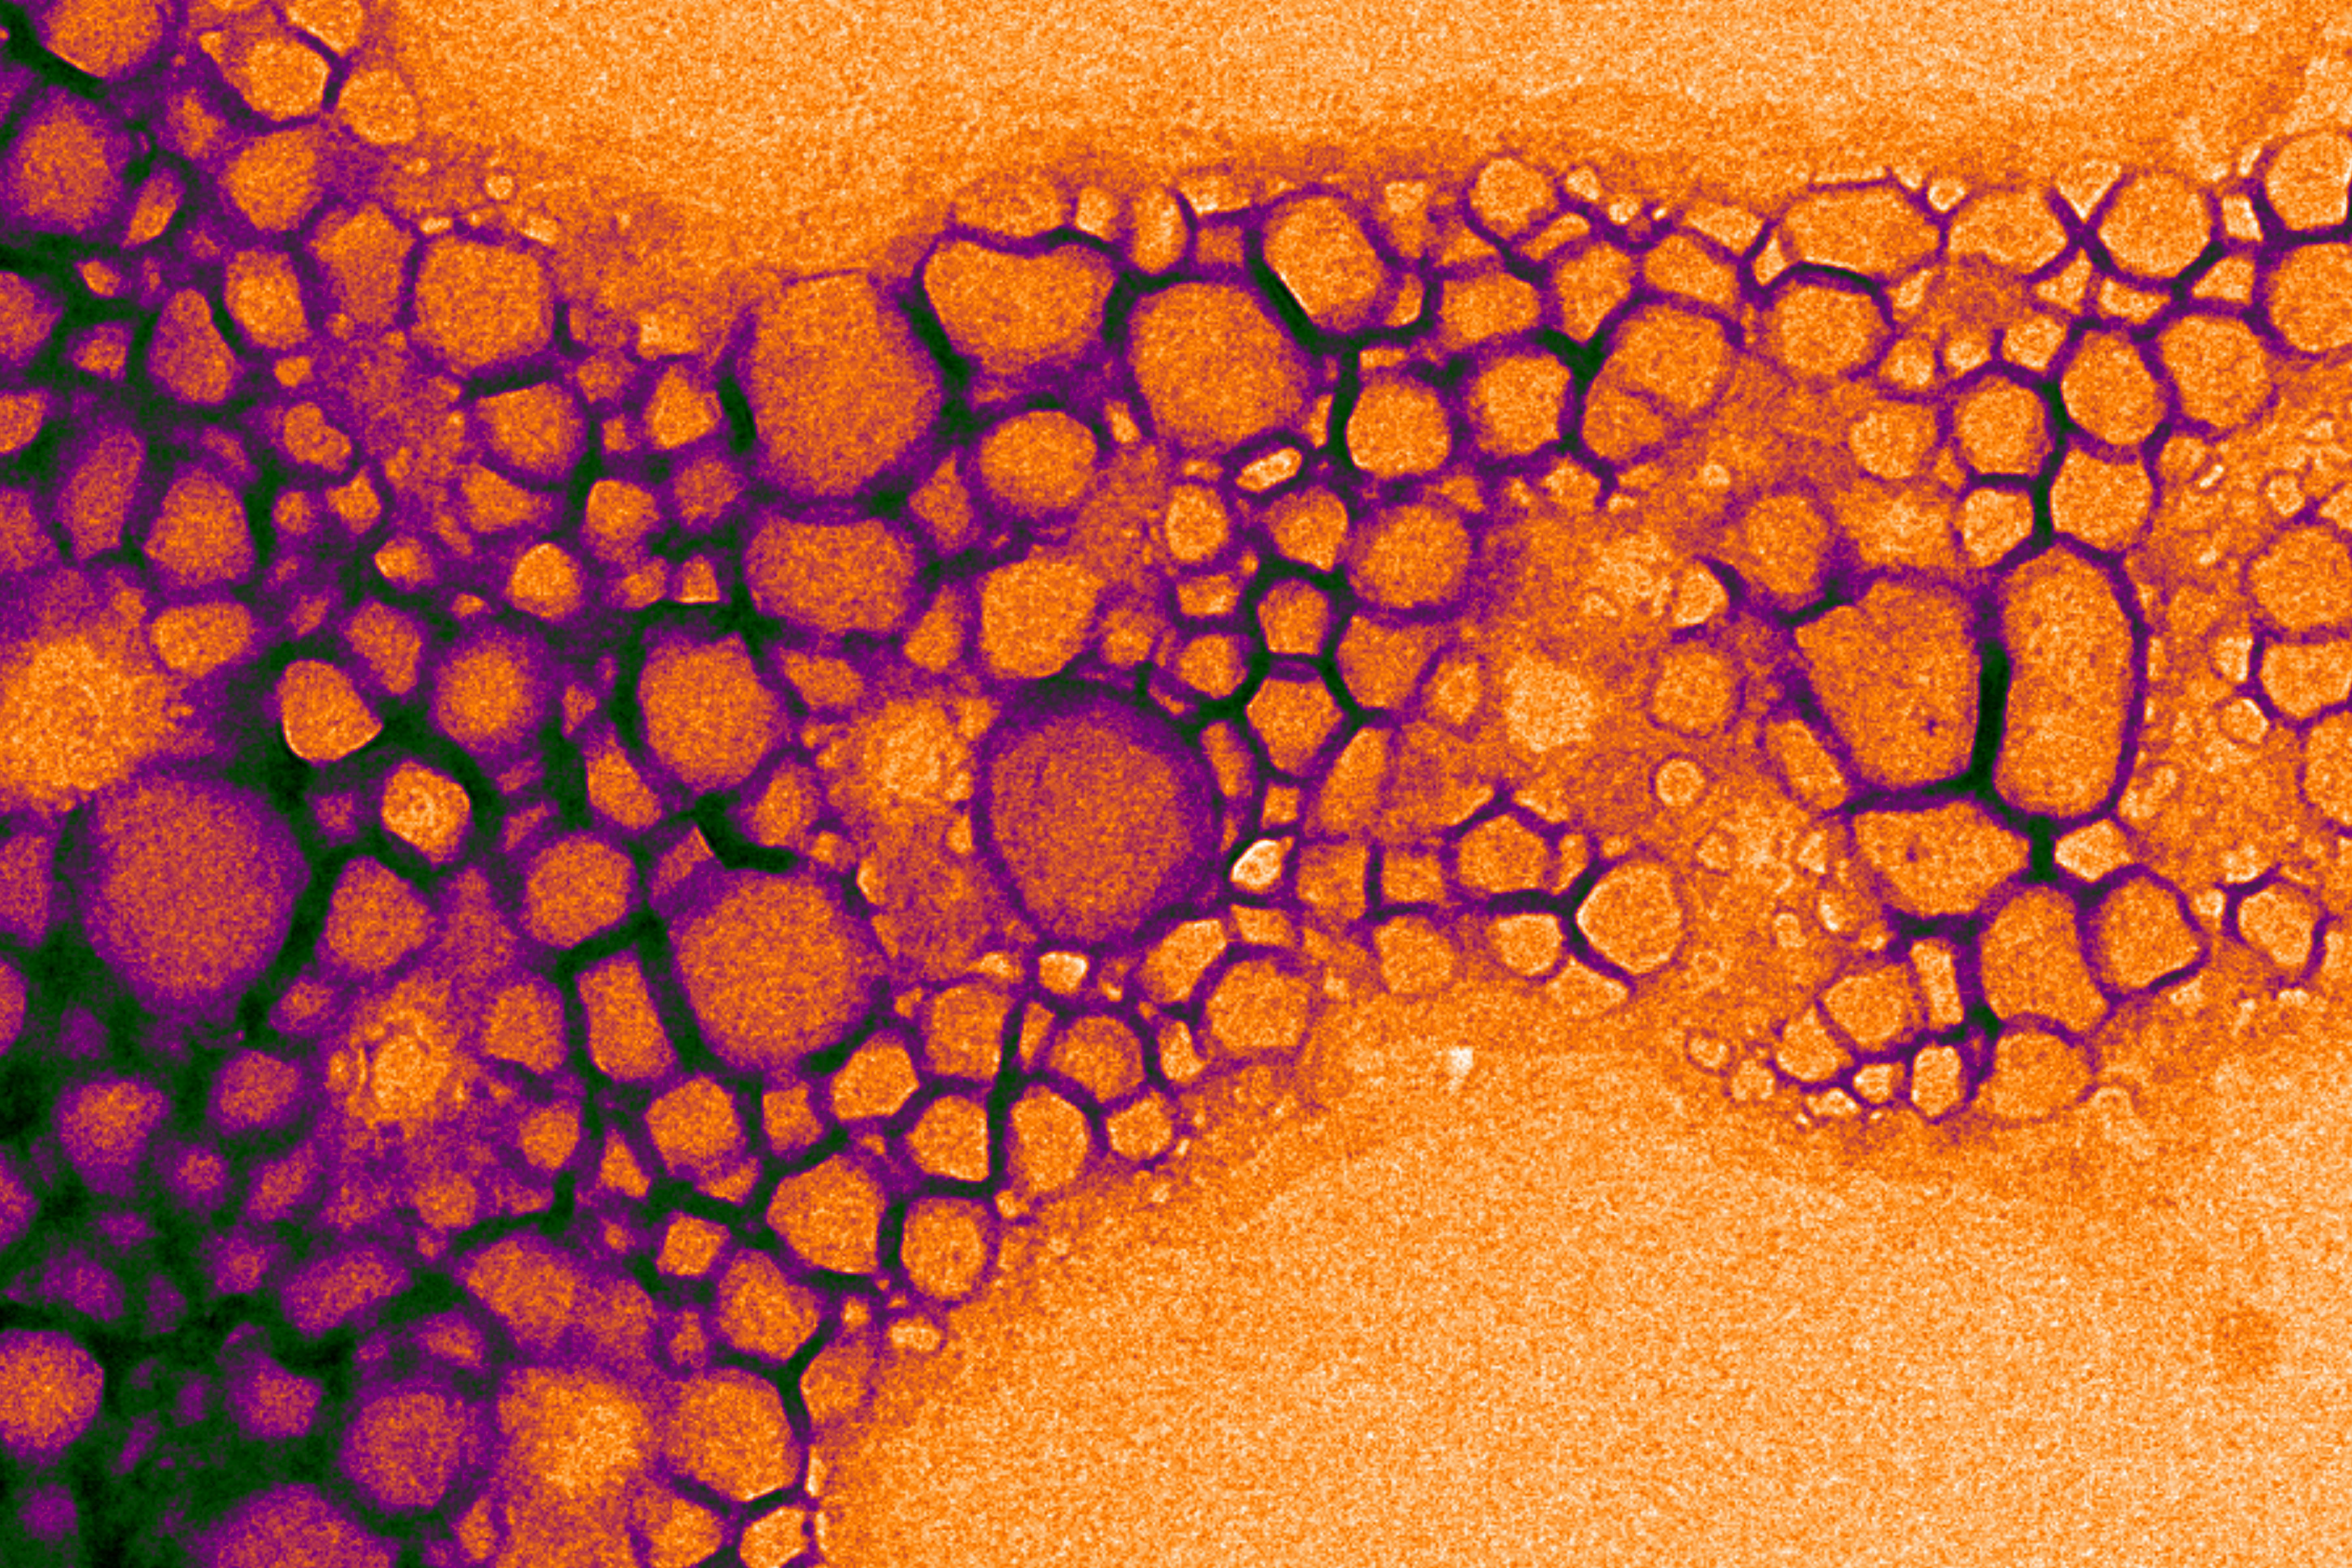 A pseudocolored transmission electron micrograph of nanodroplets filled with paramagnetic metals and perfluorocarbon materials.